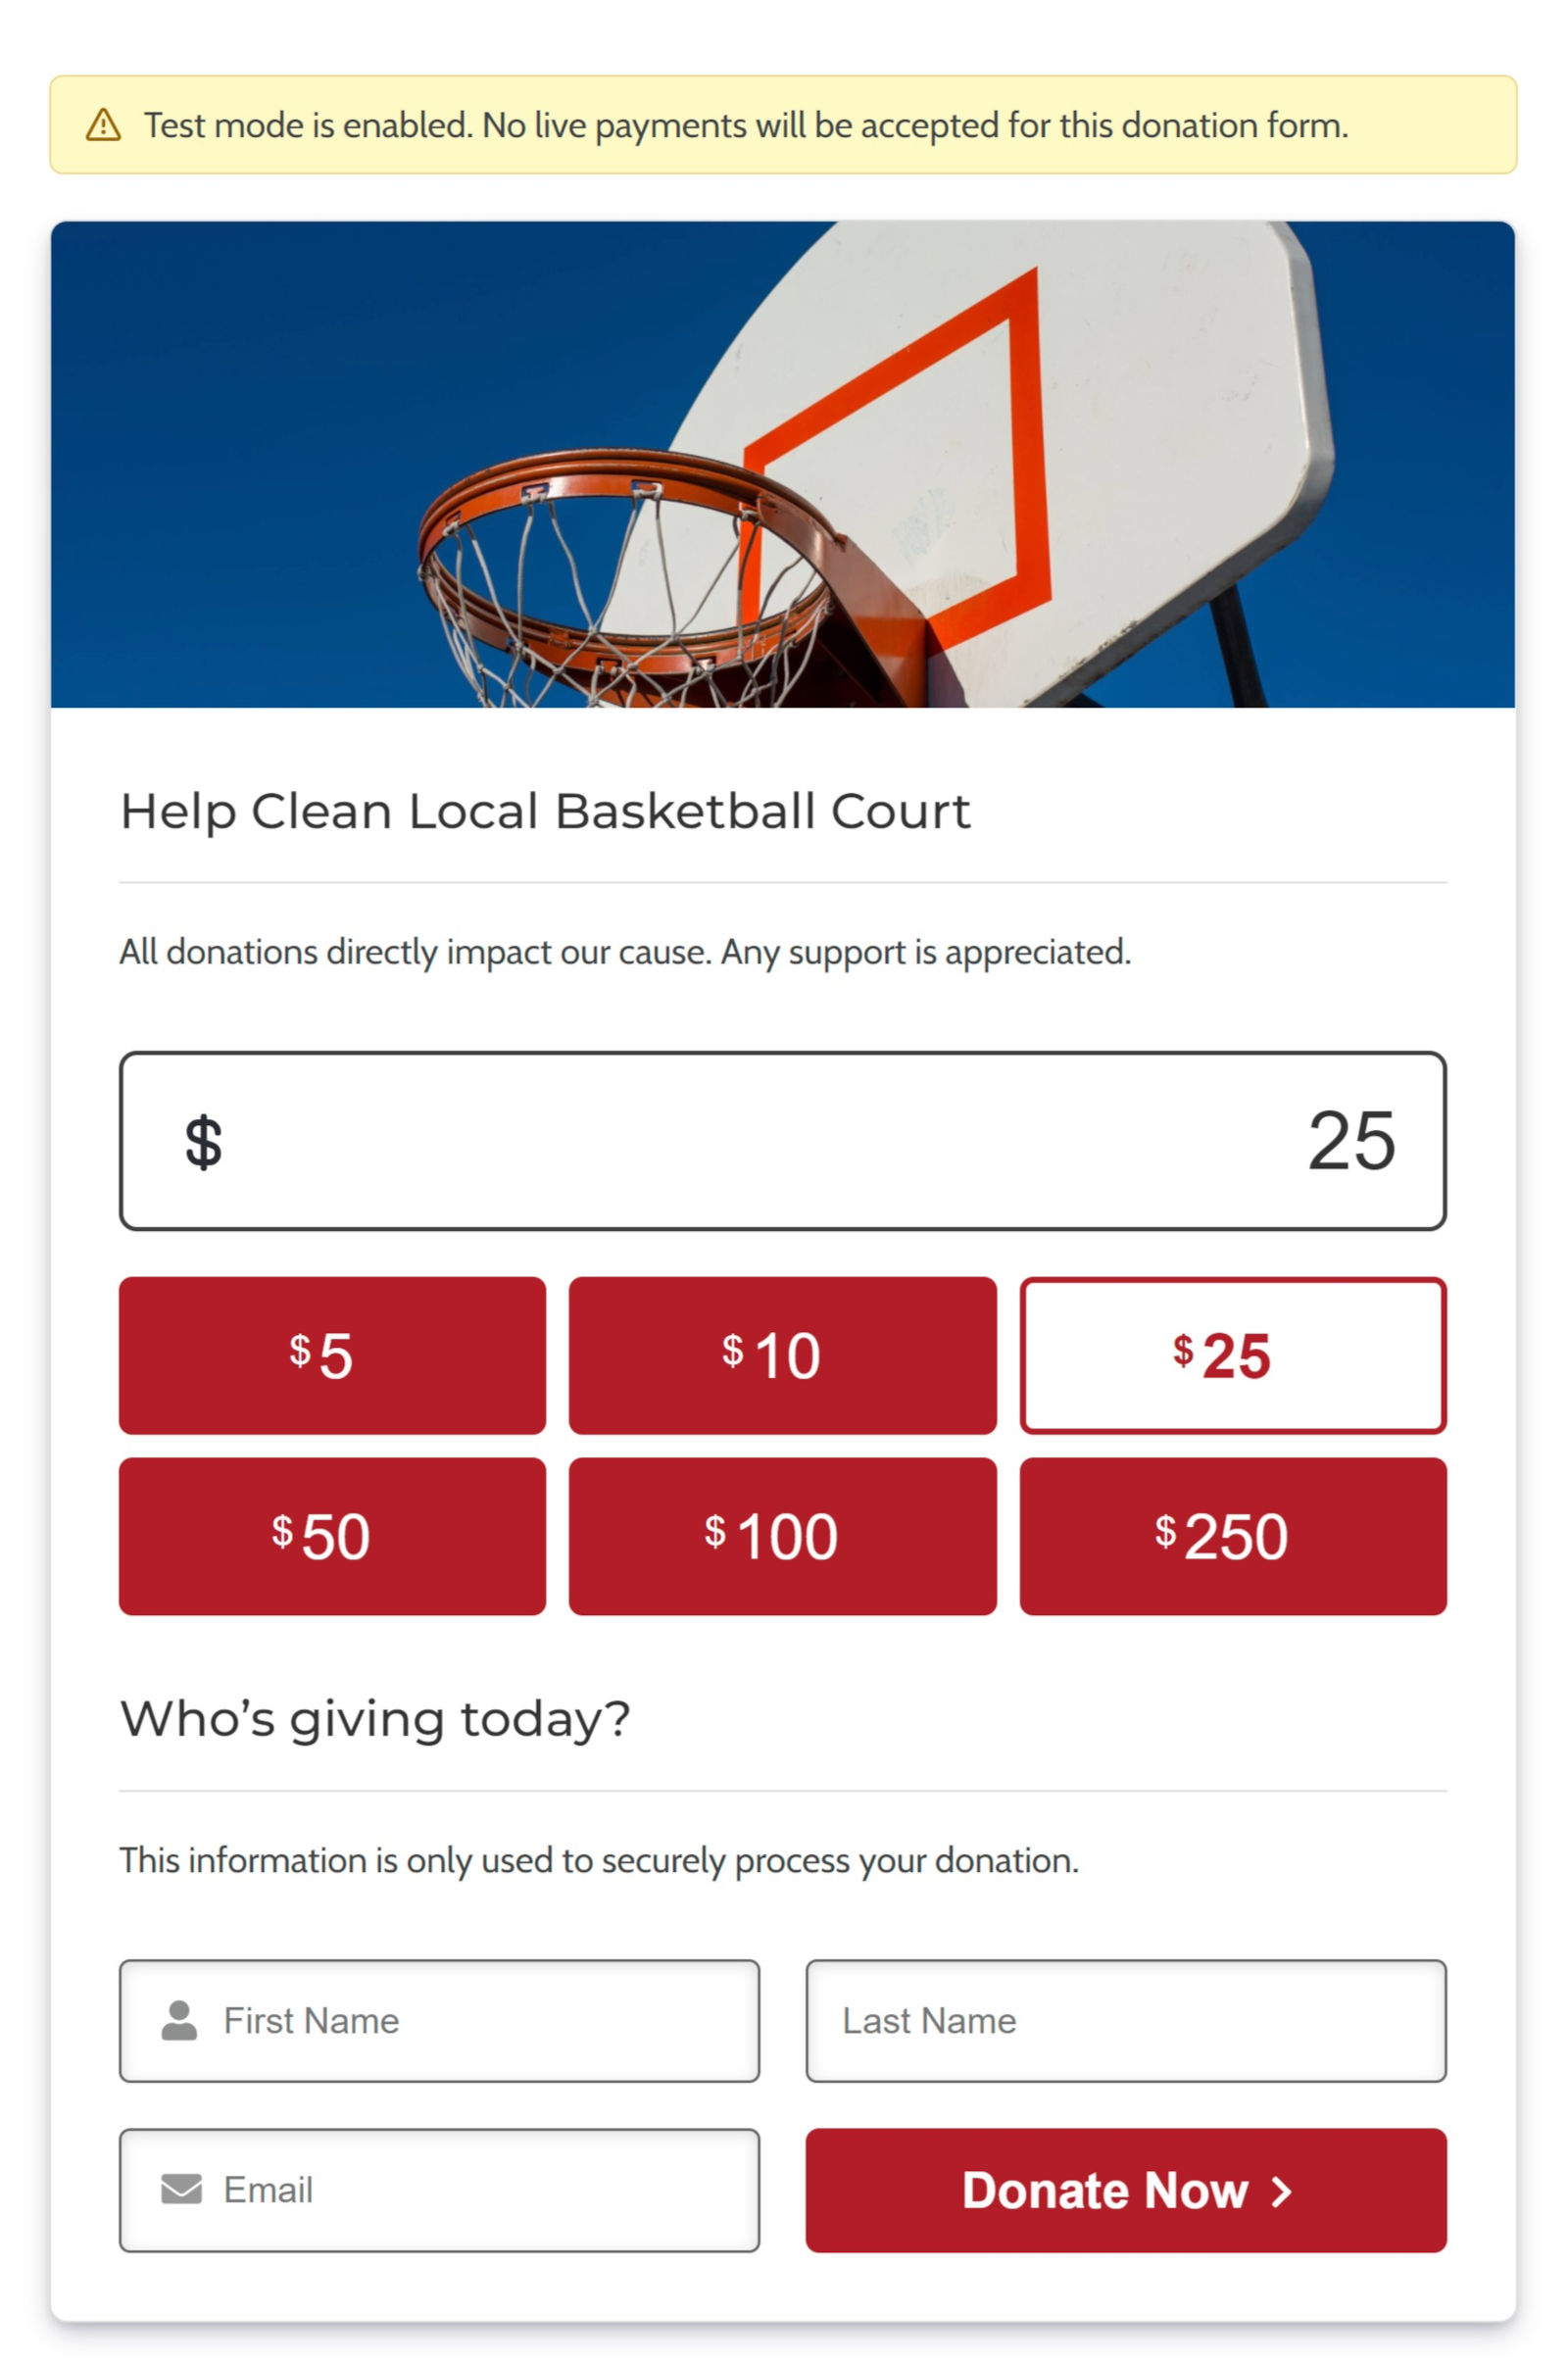 Fictional donation form for cleaning a local basketball court.  Has a header image, text, and buttons for donating various amounts.